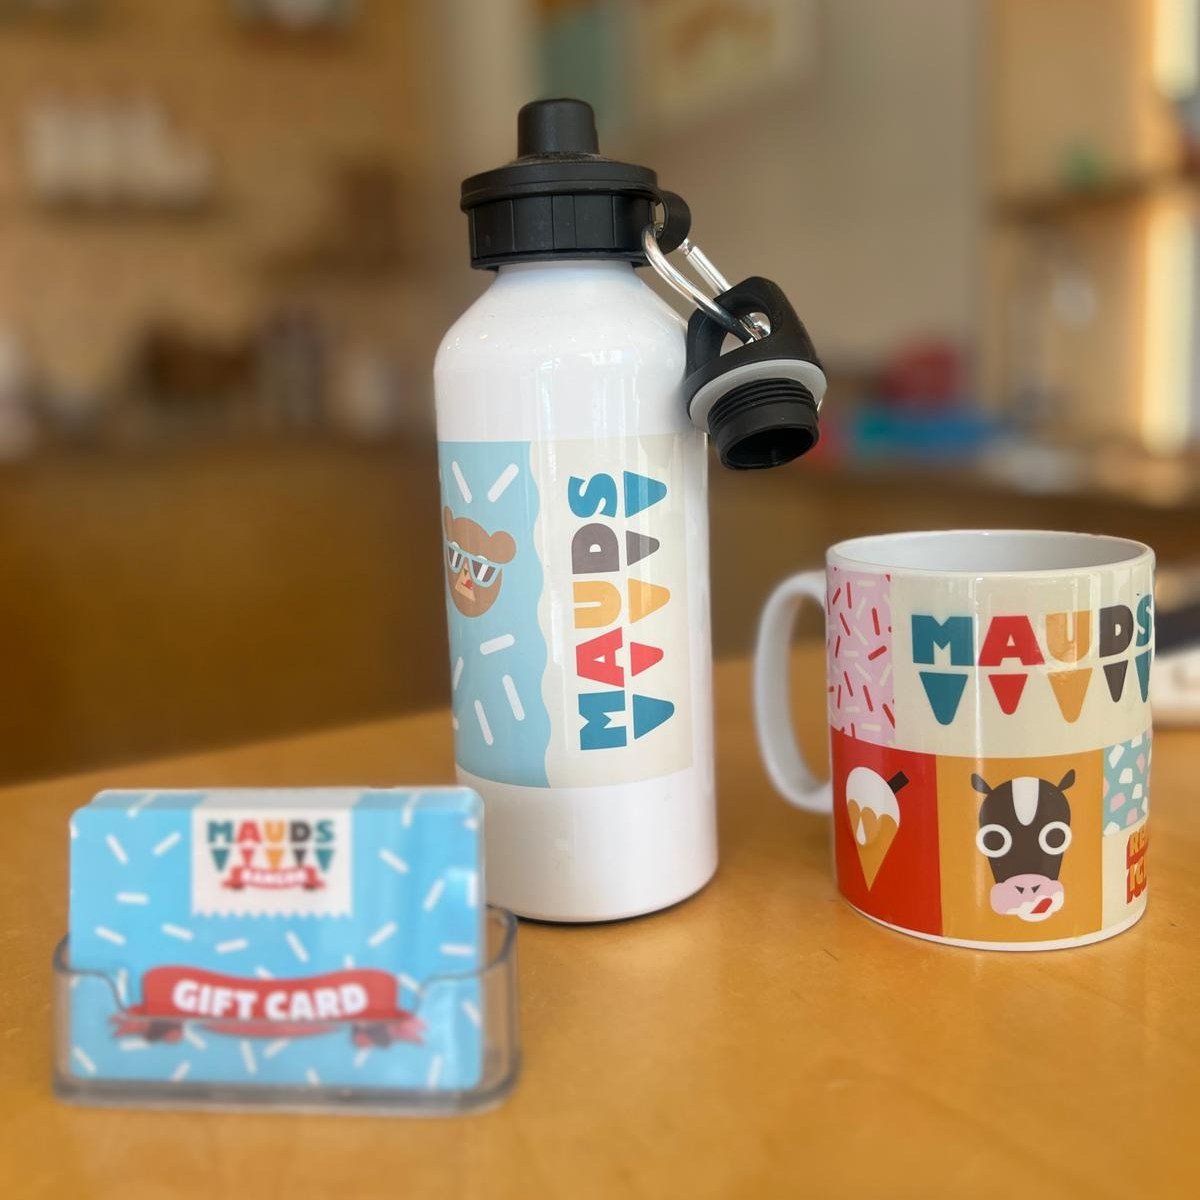 🍦 COMPETITION TIME! 🍦

Did you know that you can buy a branded Mauds mug and water bottle from our Bangor store? Plus our Mauds Bangor, Holywood and Ormeau Road stores sell gift cards, the perfect present for a big Mauds fan! 🎁

To celebrate the g